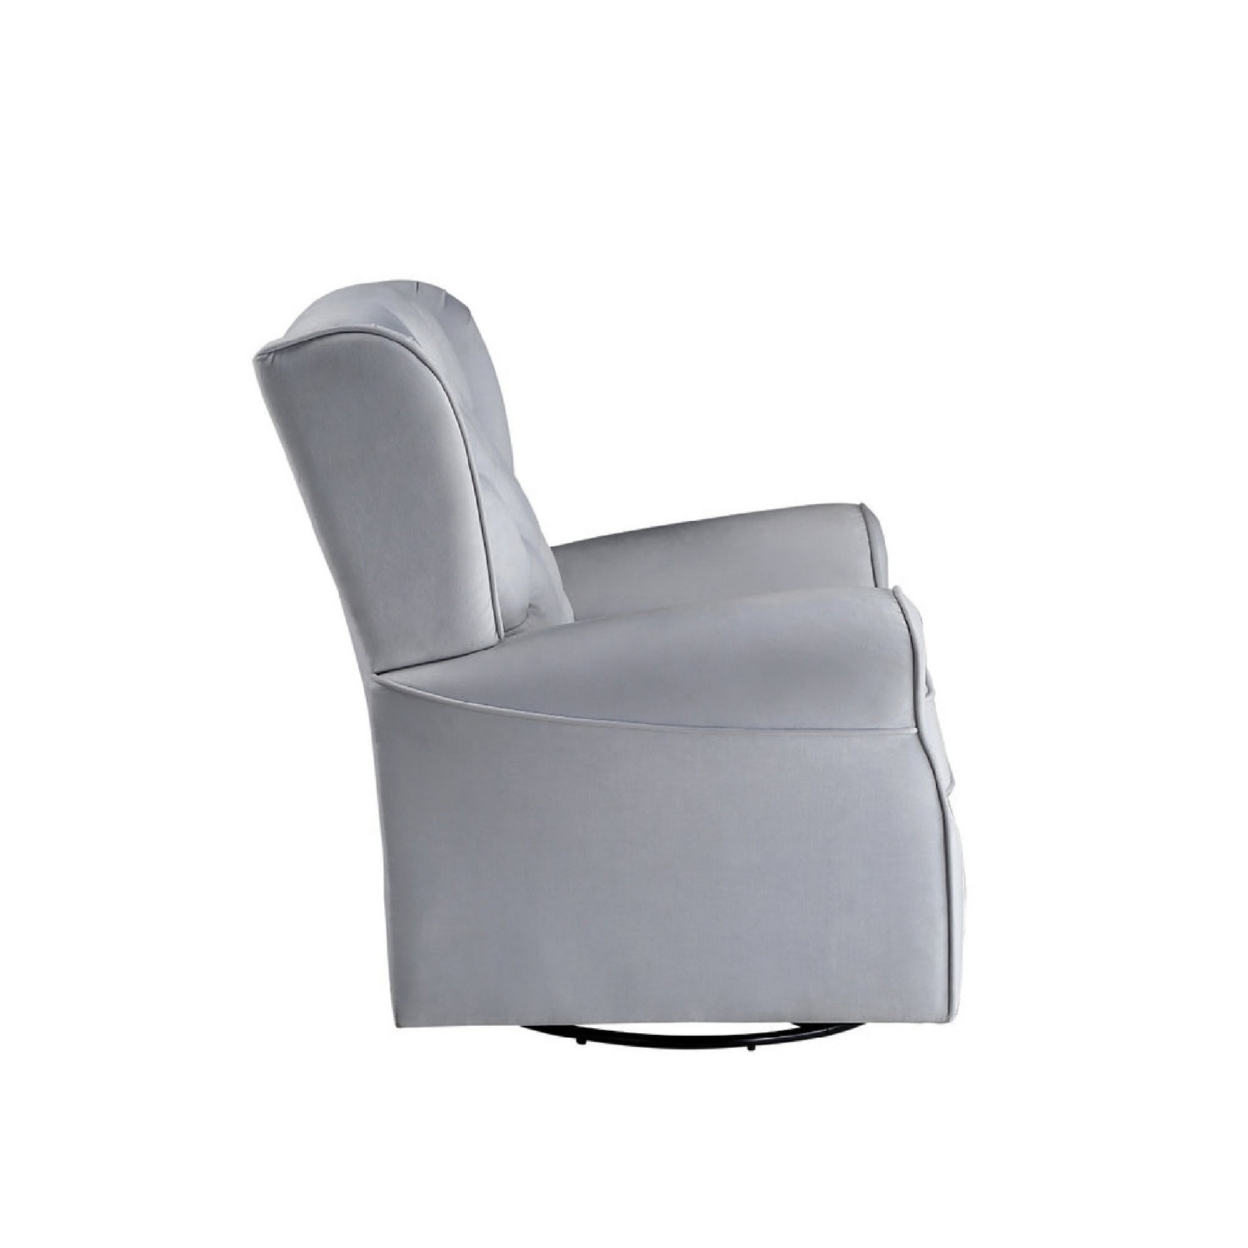 35 Inch Accent Swivel Chair, Glider, Tufted Back, Gray